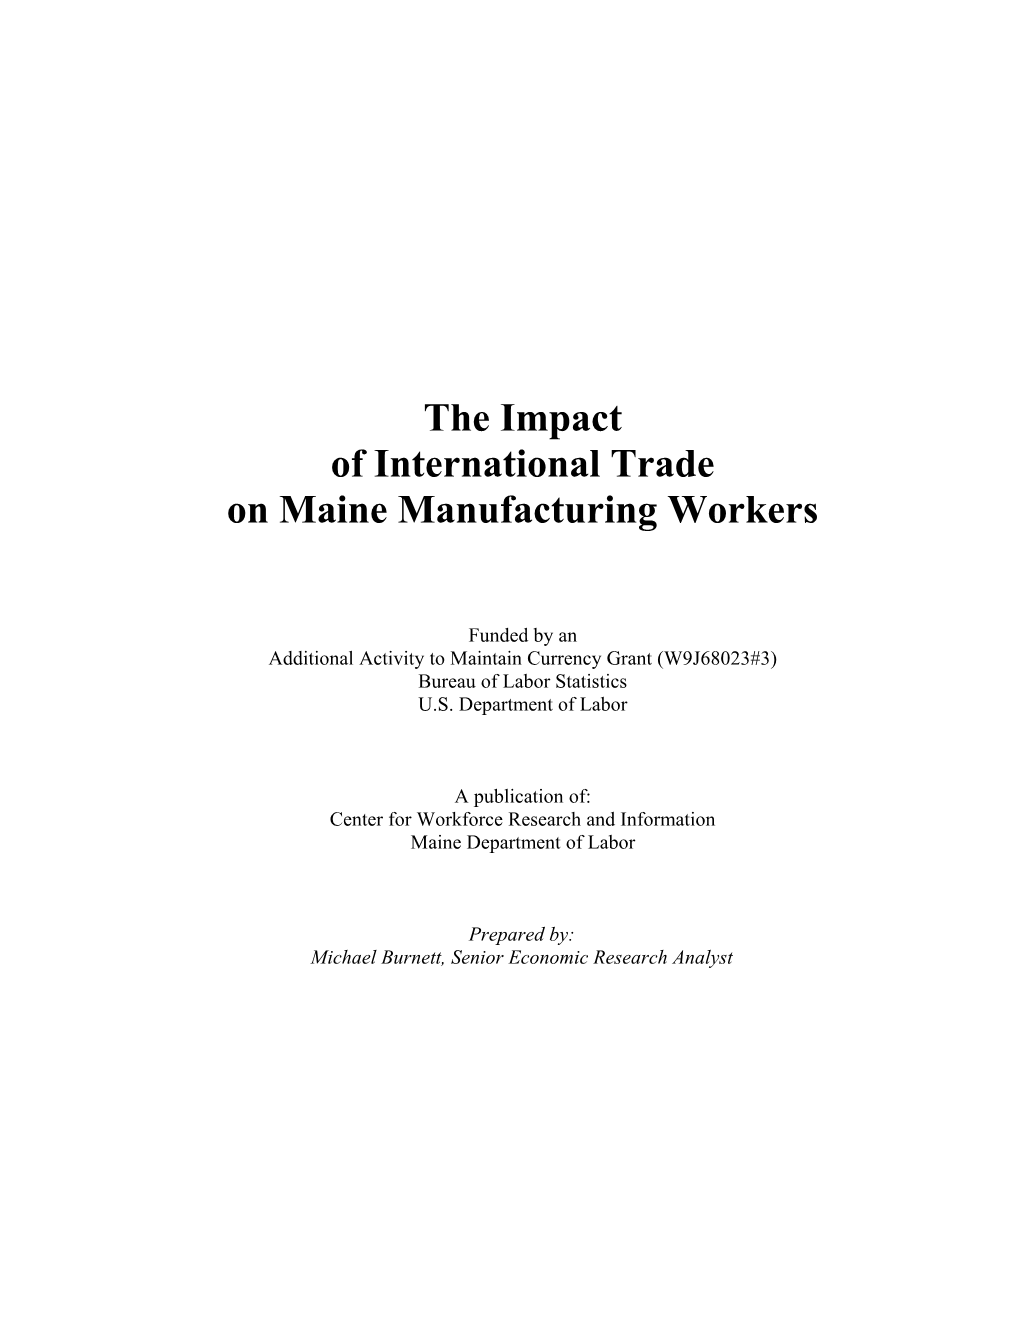 The Impact of International Trade on Maine S Manufacturing Workforce 2001 to 2005